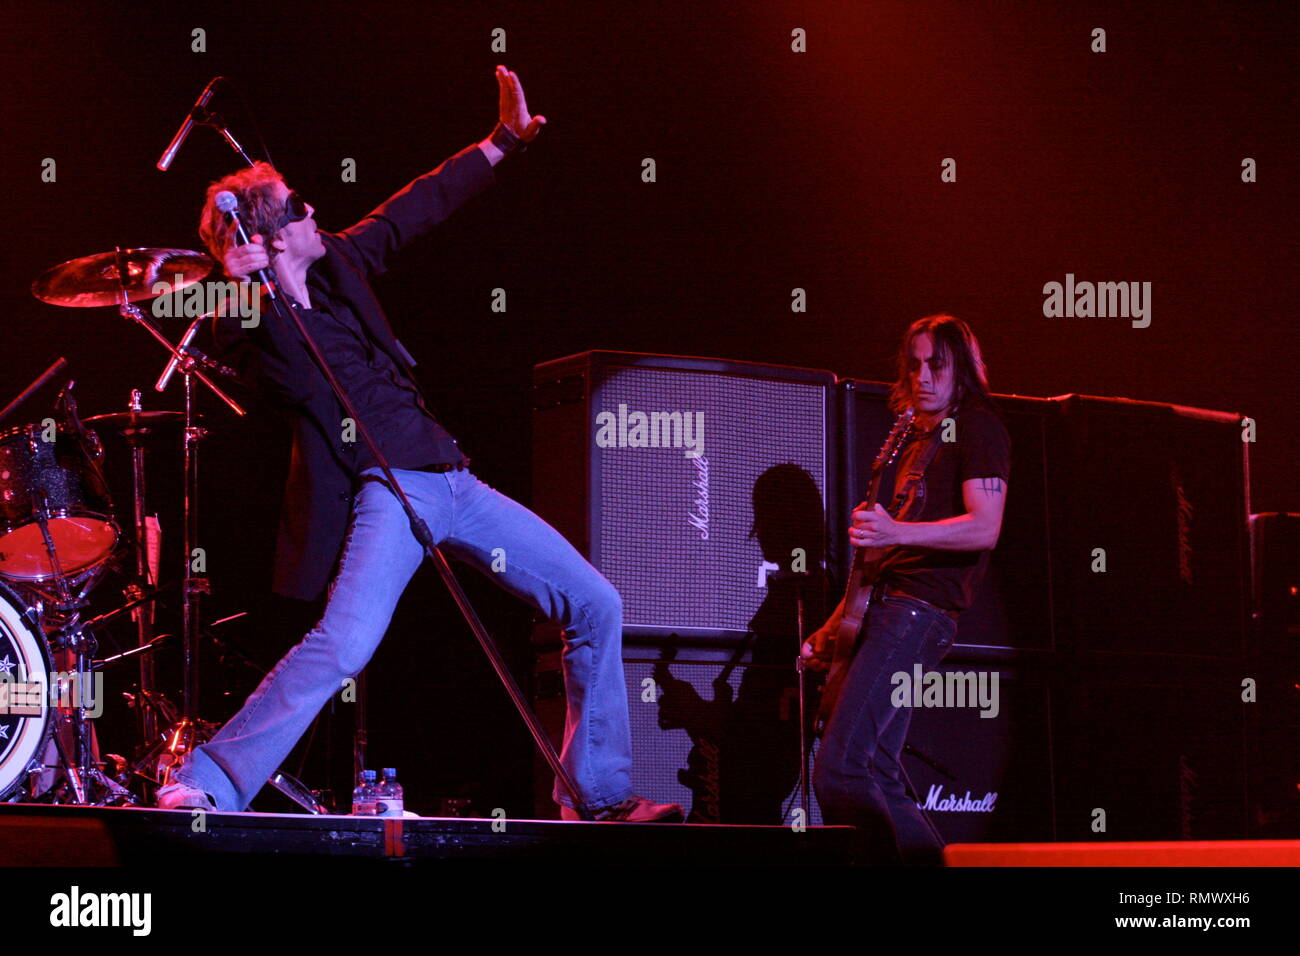 Extreme vocalist Gary Cherone is shown on stage during a 'live' concert performance. Stock Photo